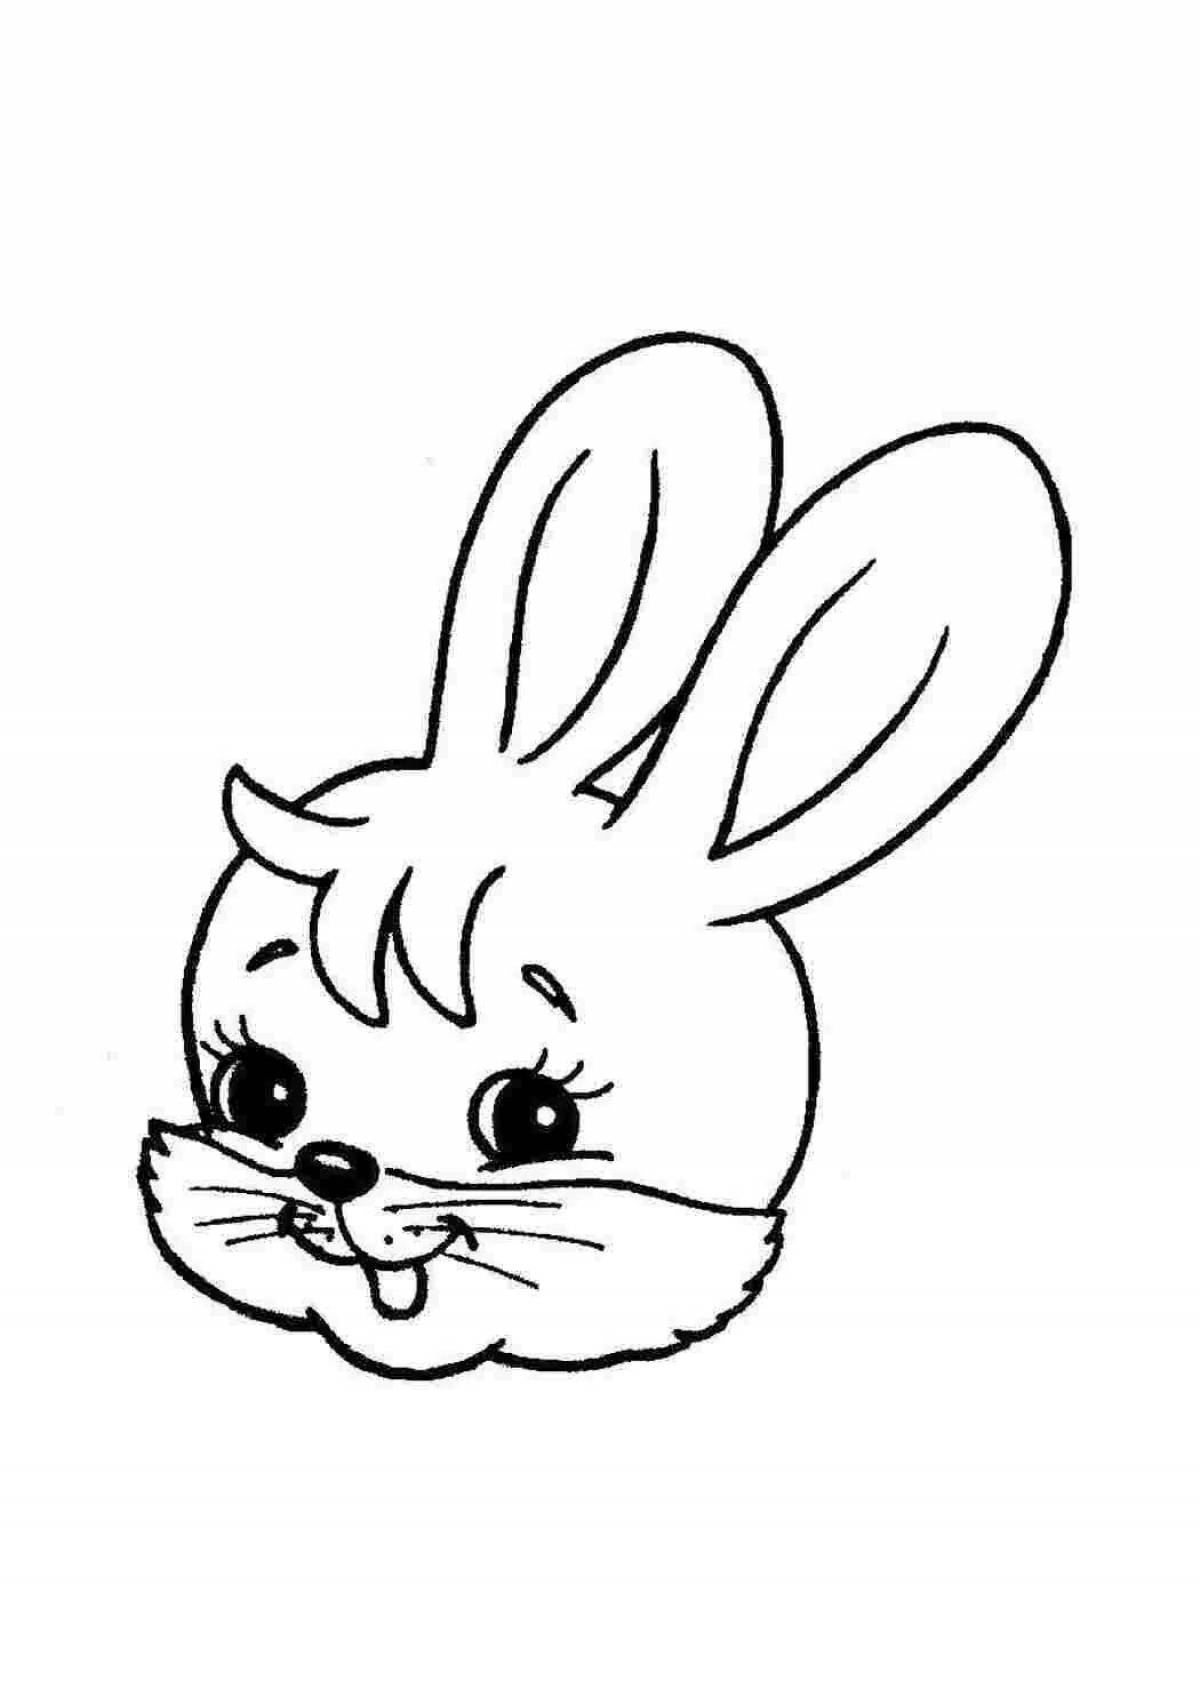 Animated rabbit head coloring page